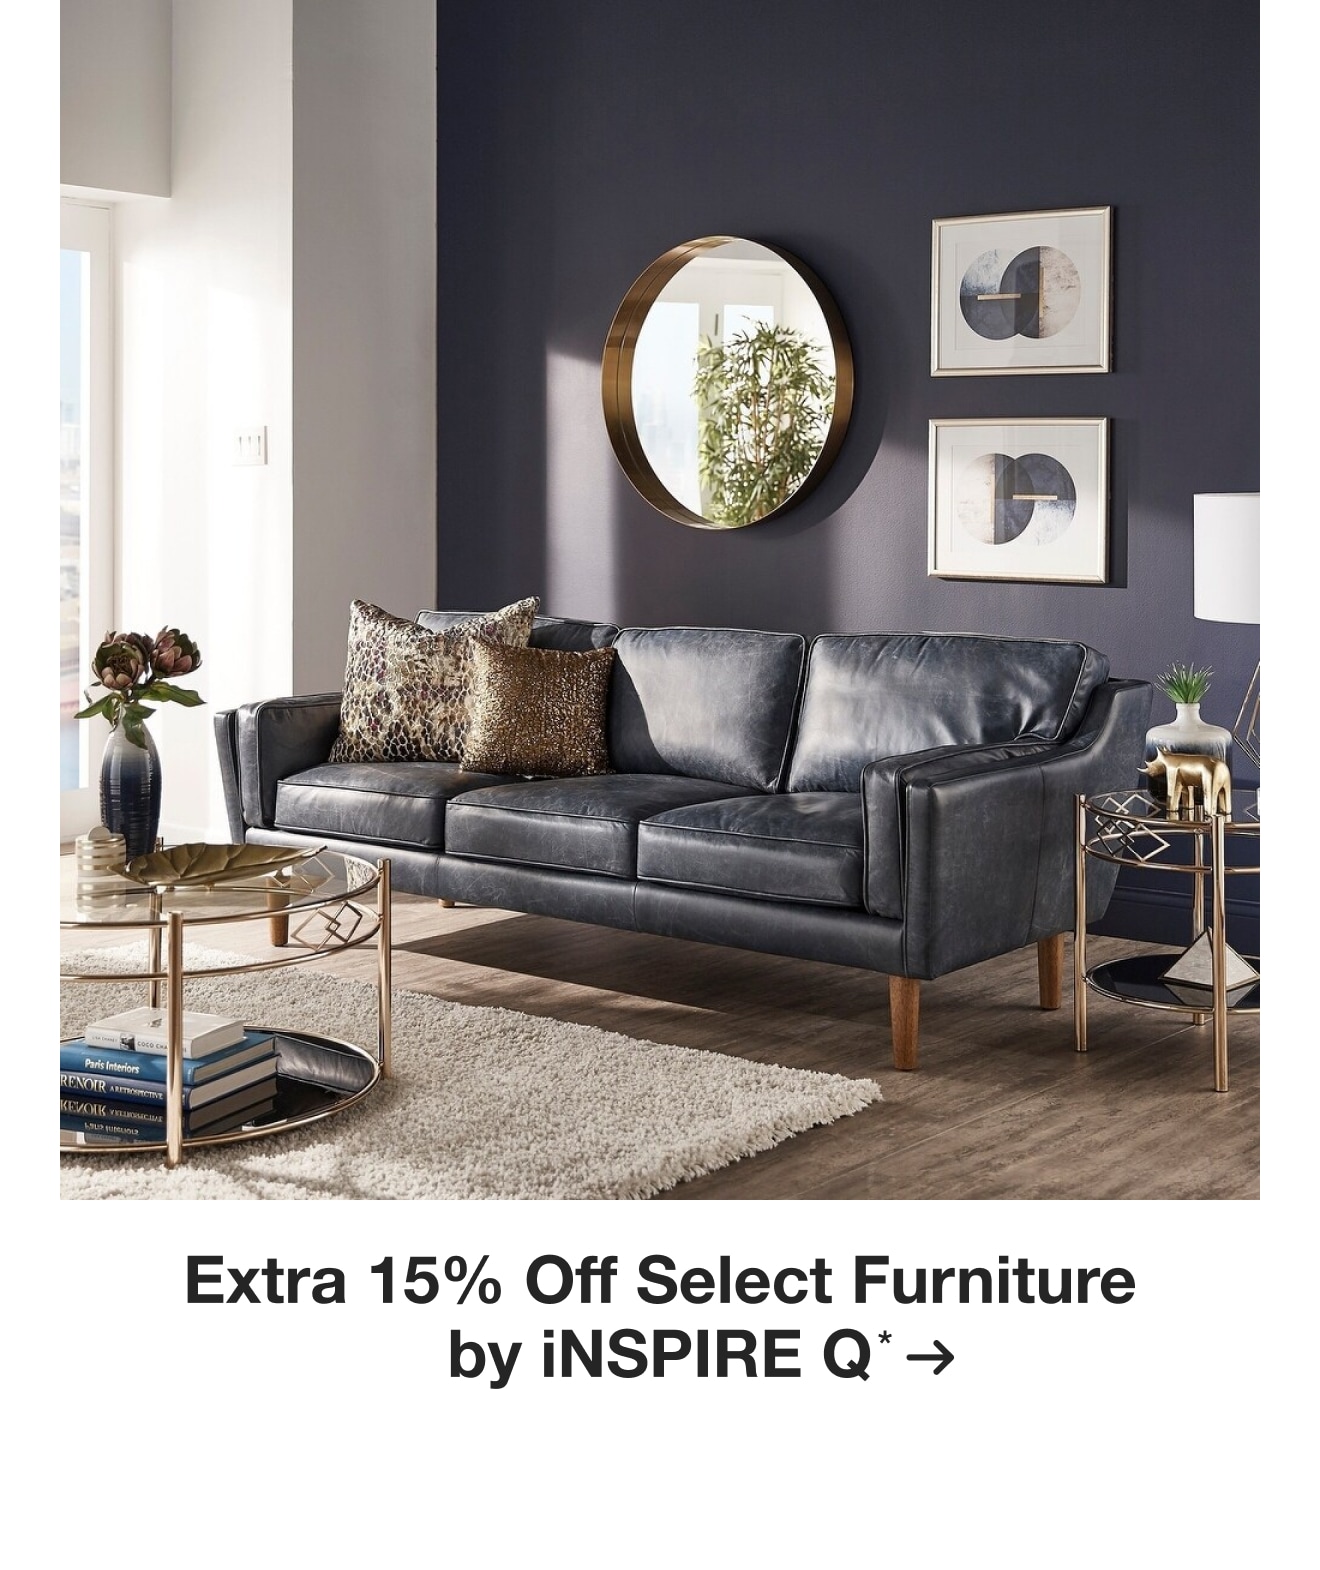 Extra 15% off Select Furniture by iNSPIRE Q*